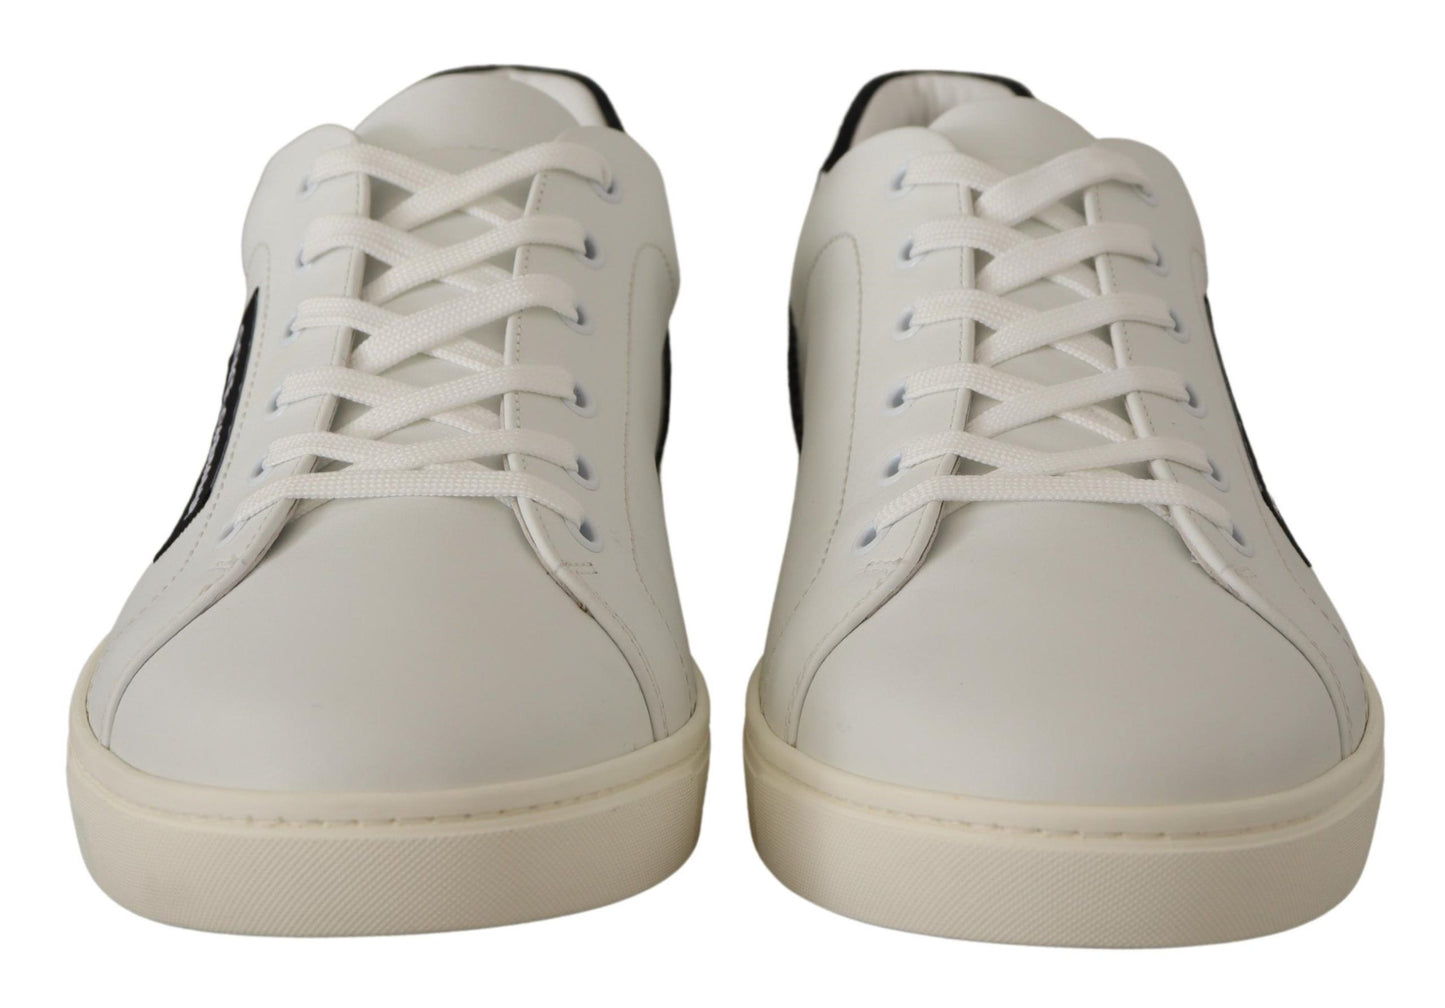 Dolce & Gabbana Elegant White Leather Low Top Sneakers